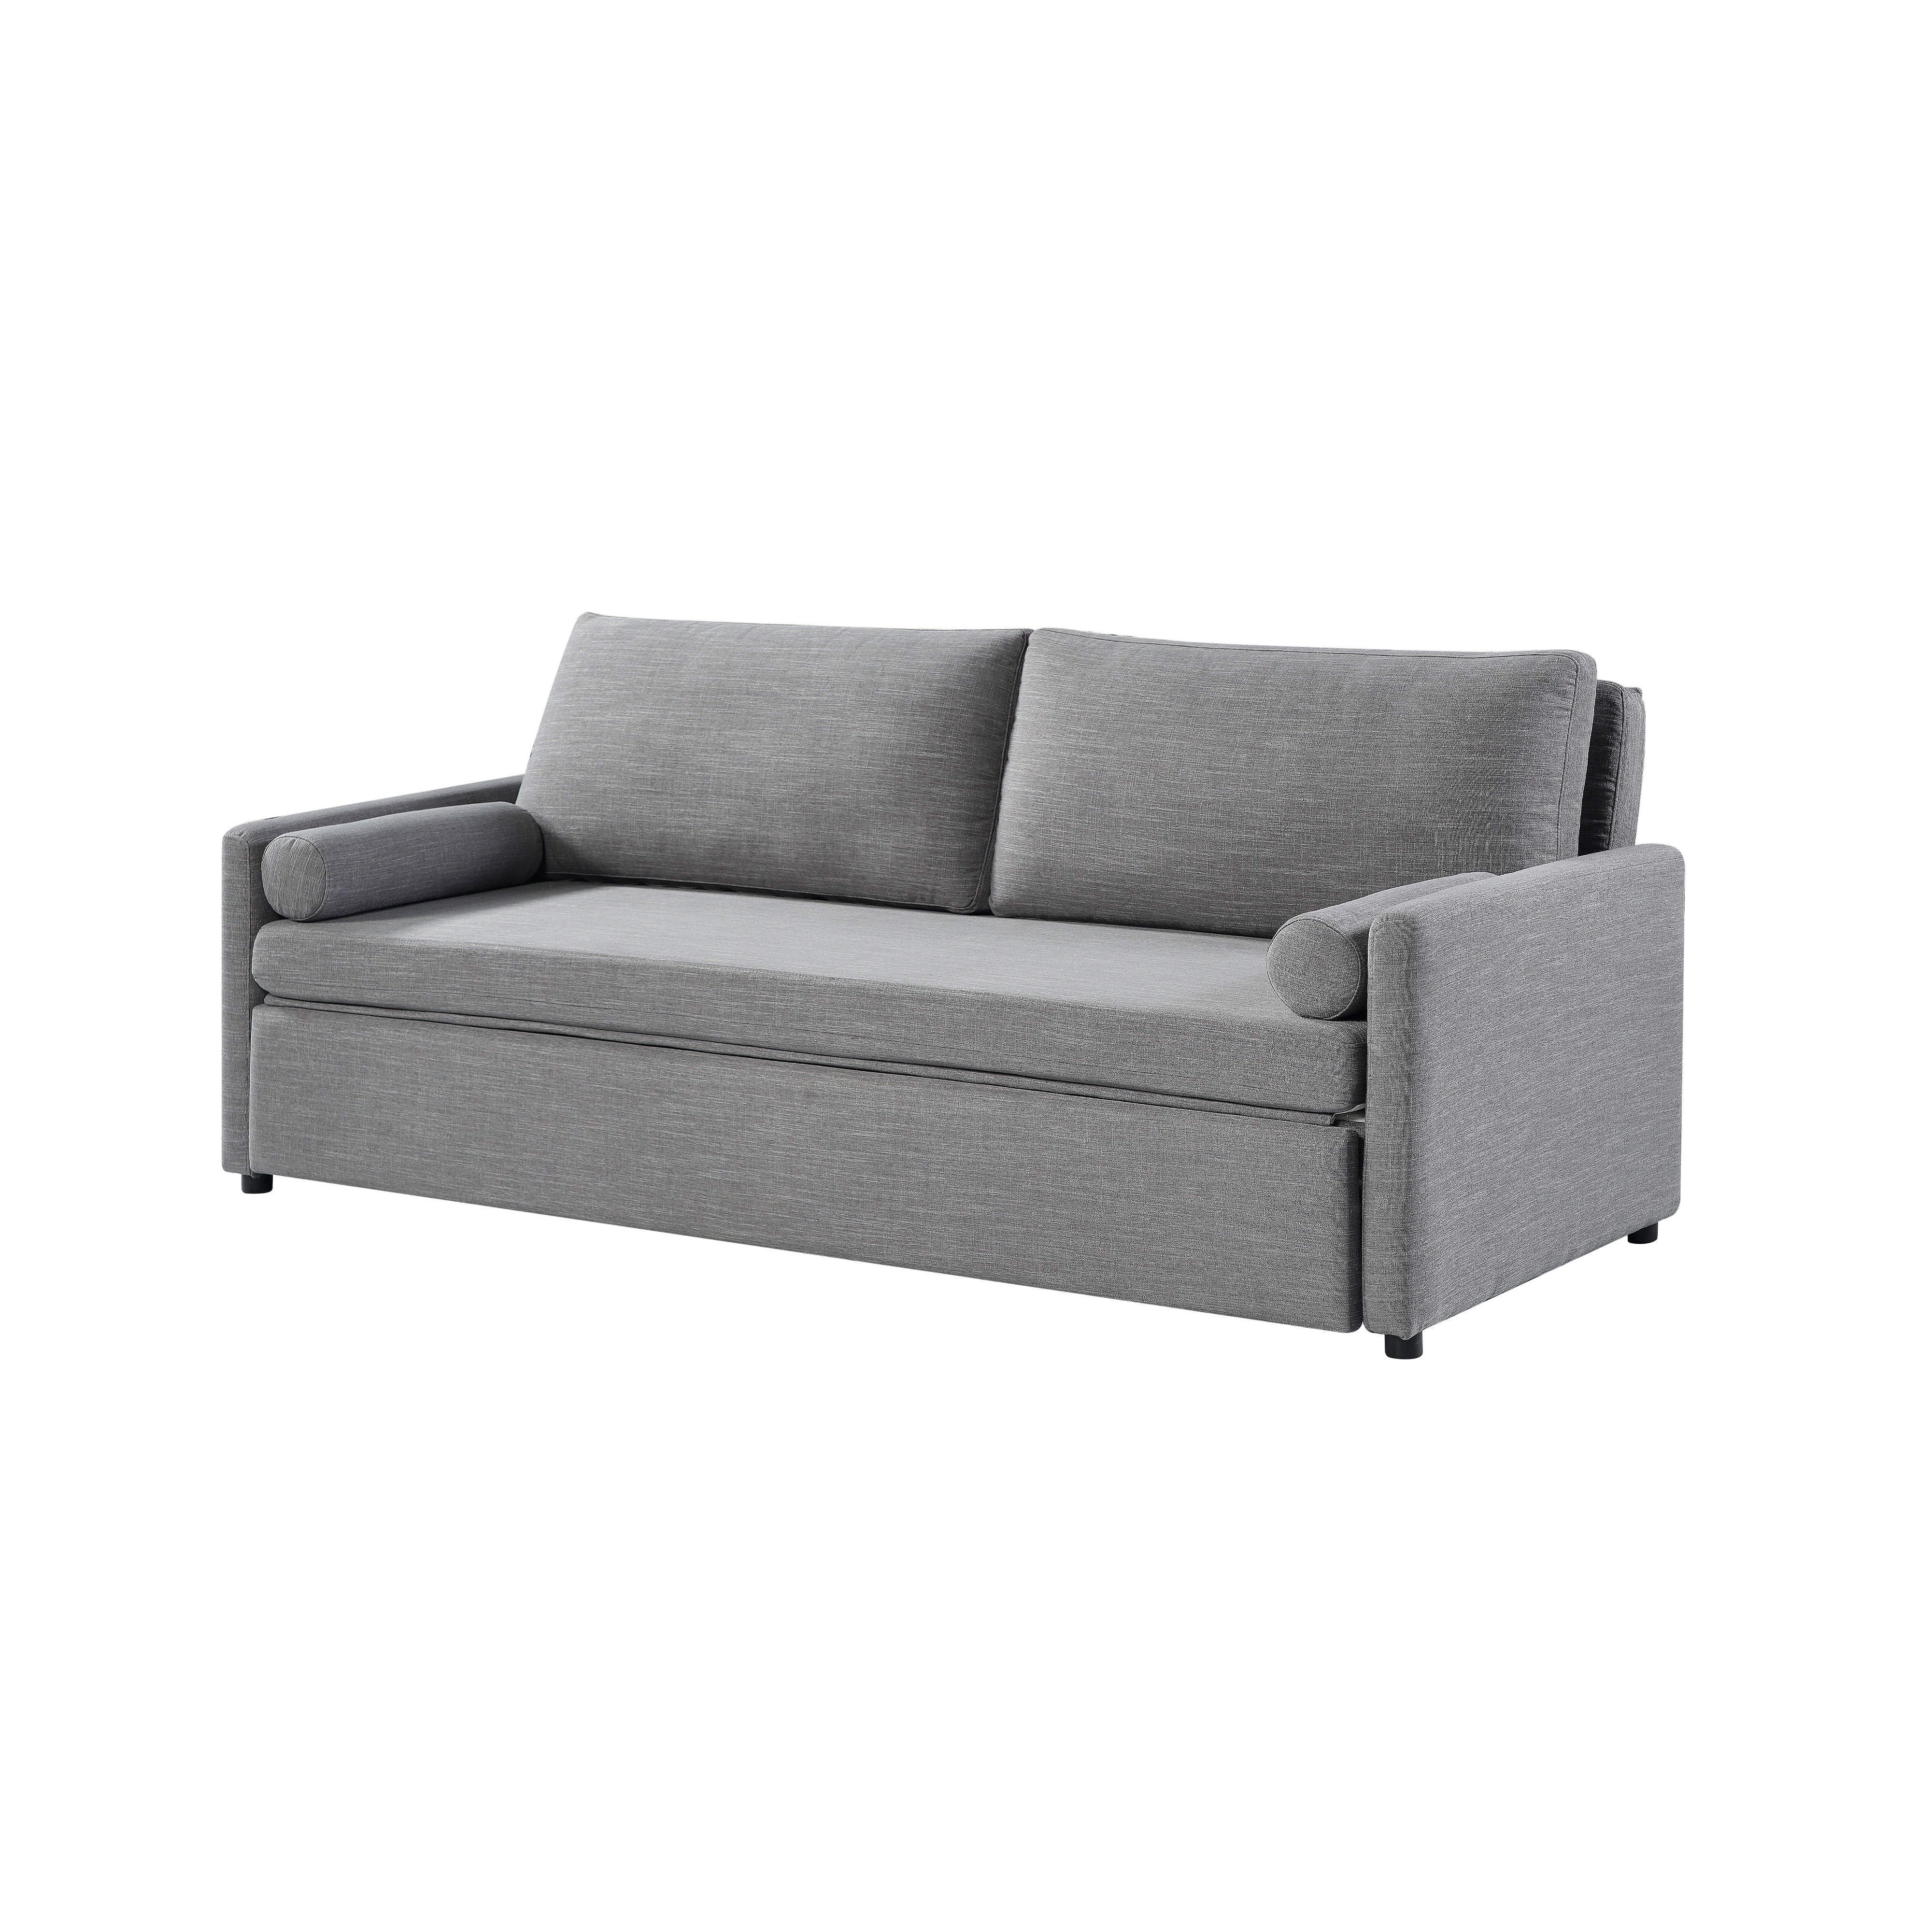 https://expandfurniture.com/wp-content/uploads/2016/12/Harmony-2-wide-King-size-sofa-bed-with-comfortable-memory-foam-even-sleep-New-Iron-Grey-fabric.jpg